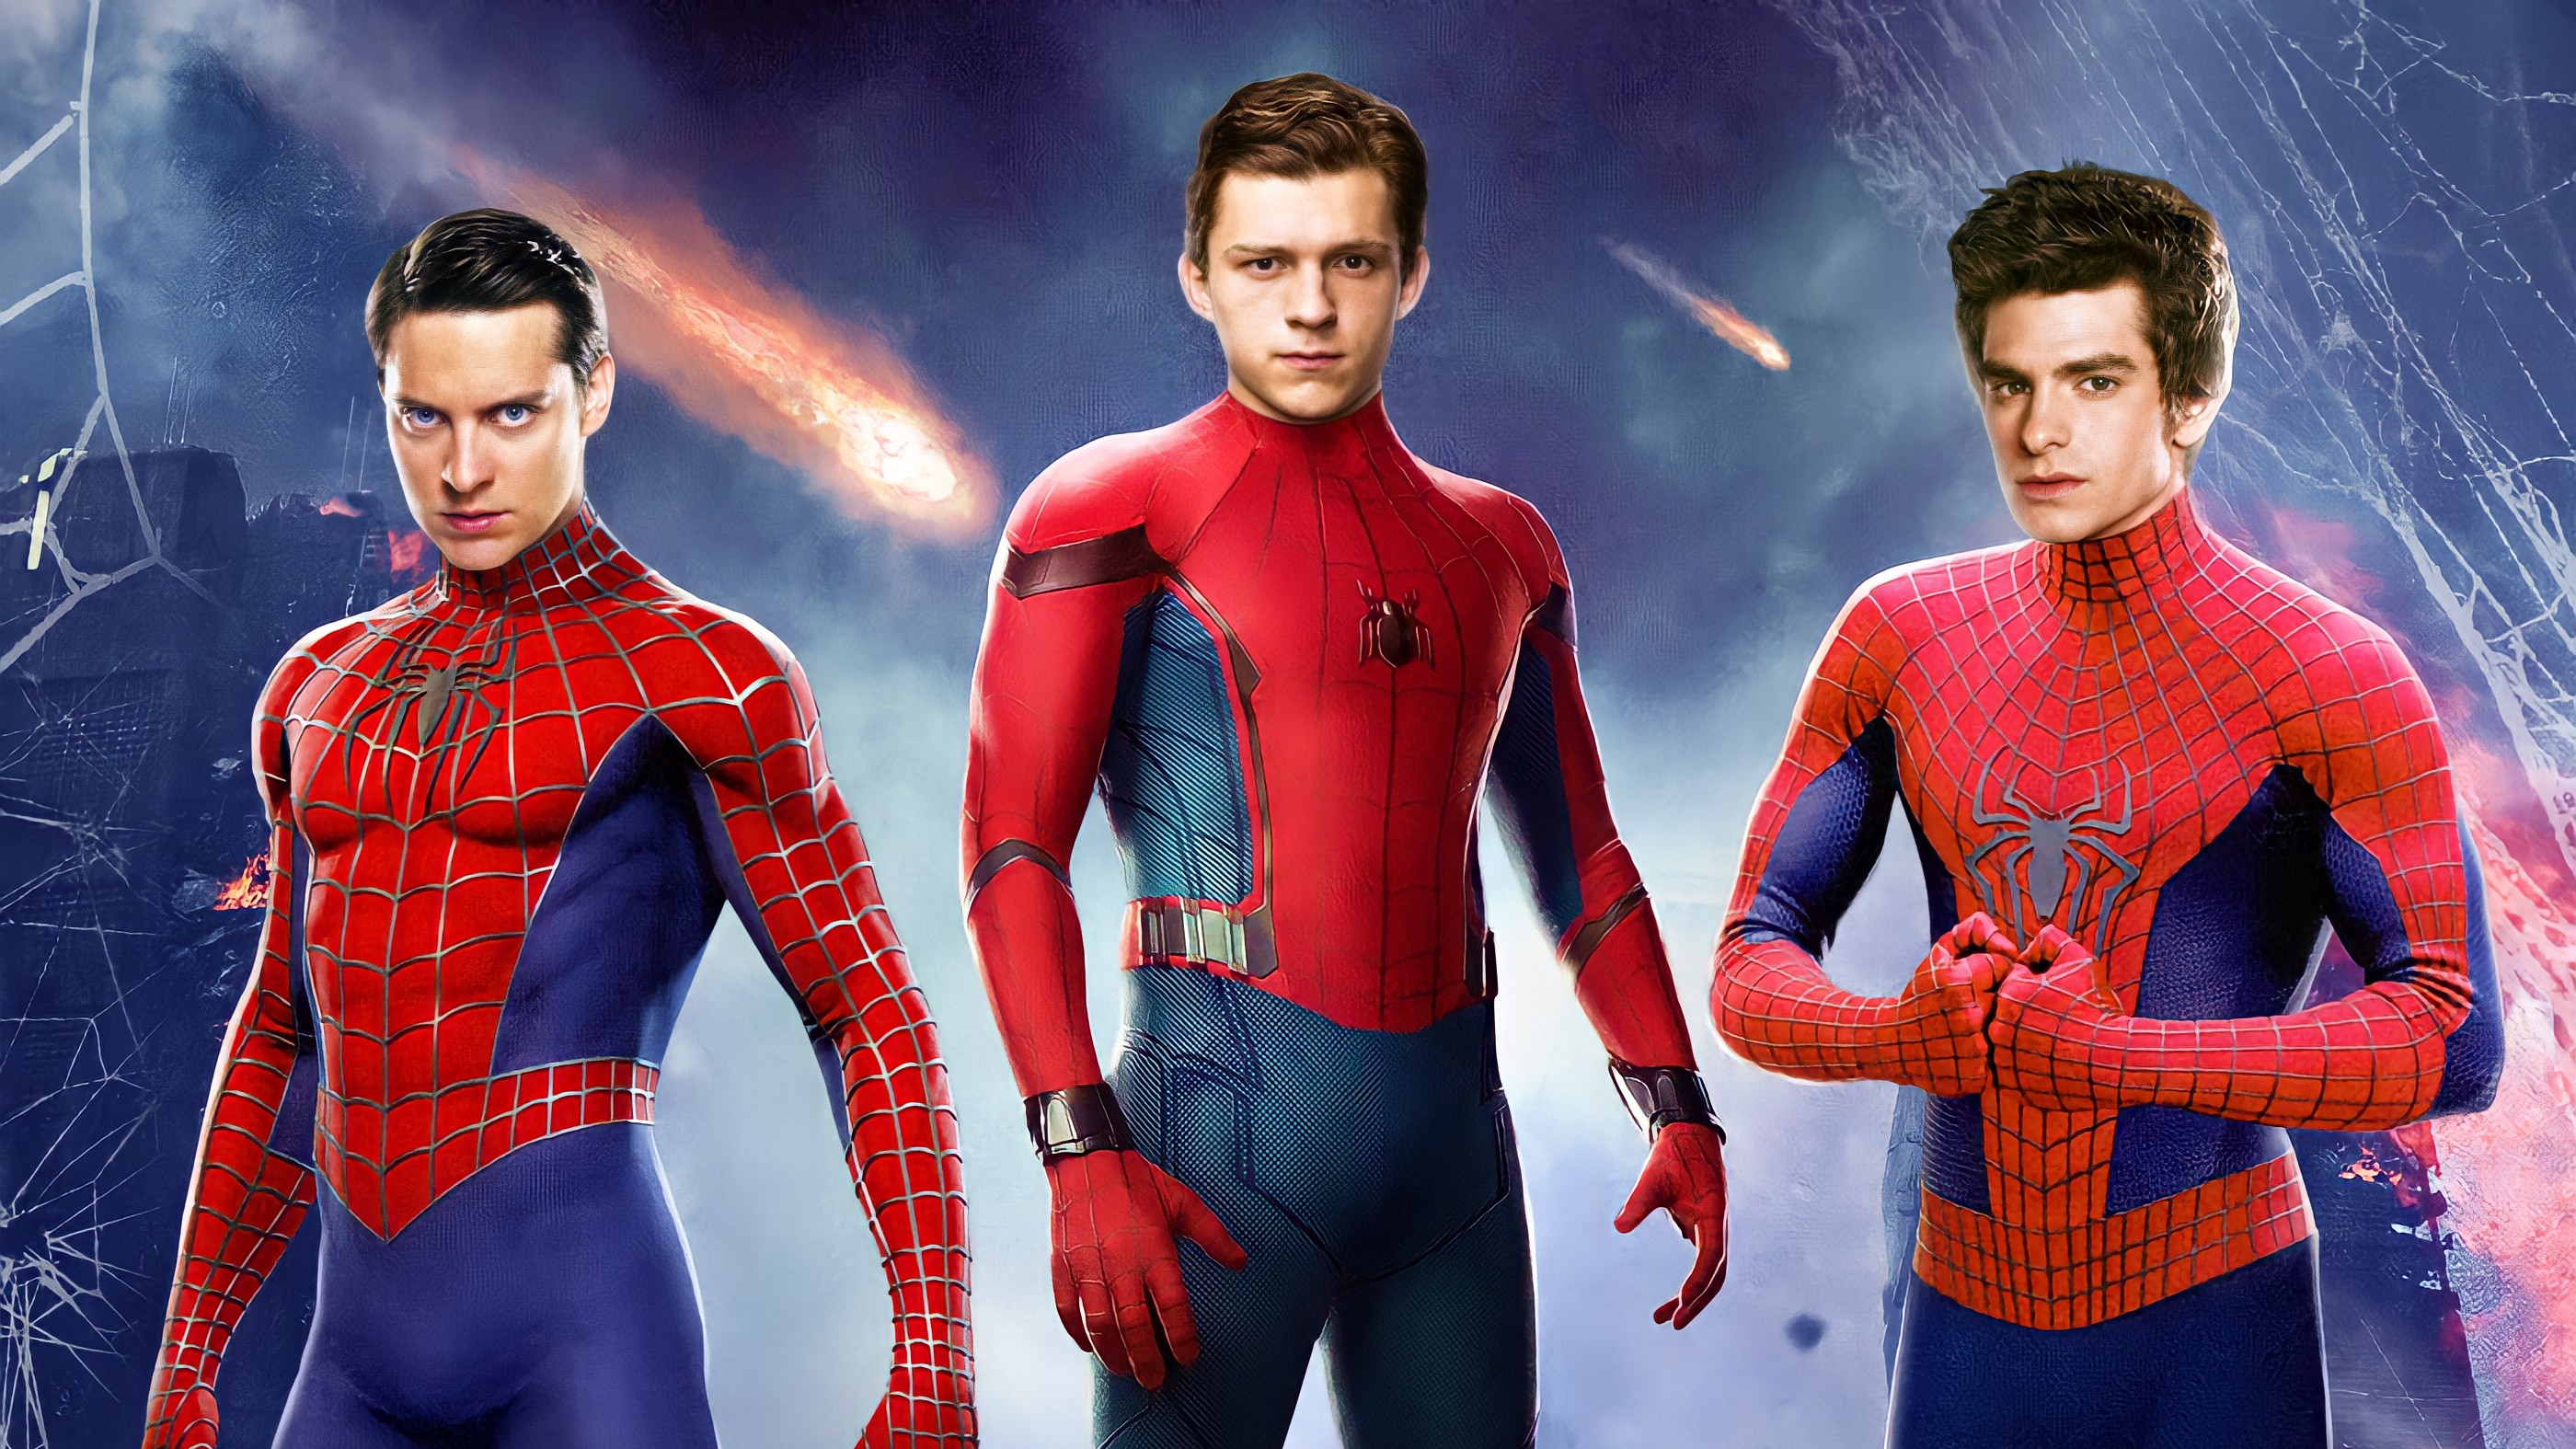 Tobey Maguire HD Wallpaper, Tom Holland, Spider Man, Tobey Maguire, Peter Parker, Andrew Garfield, Superhero HD Wallpaper